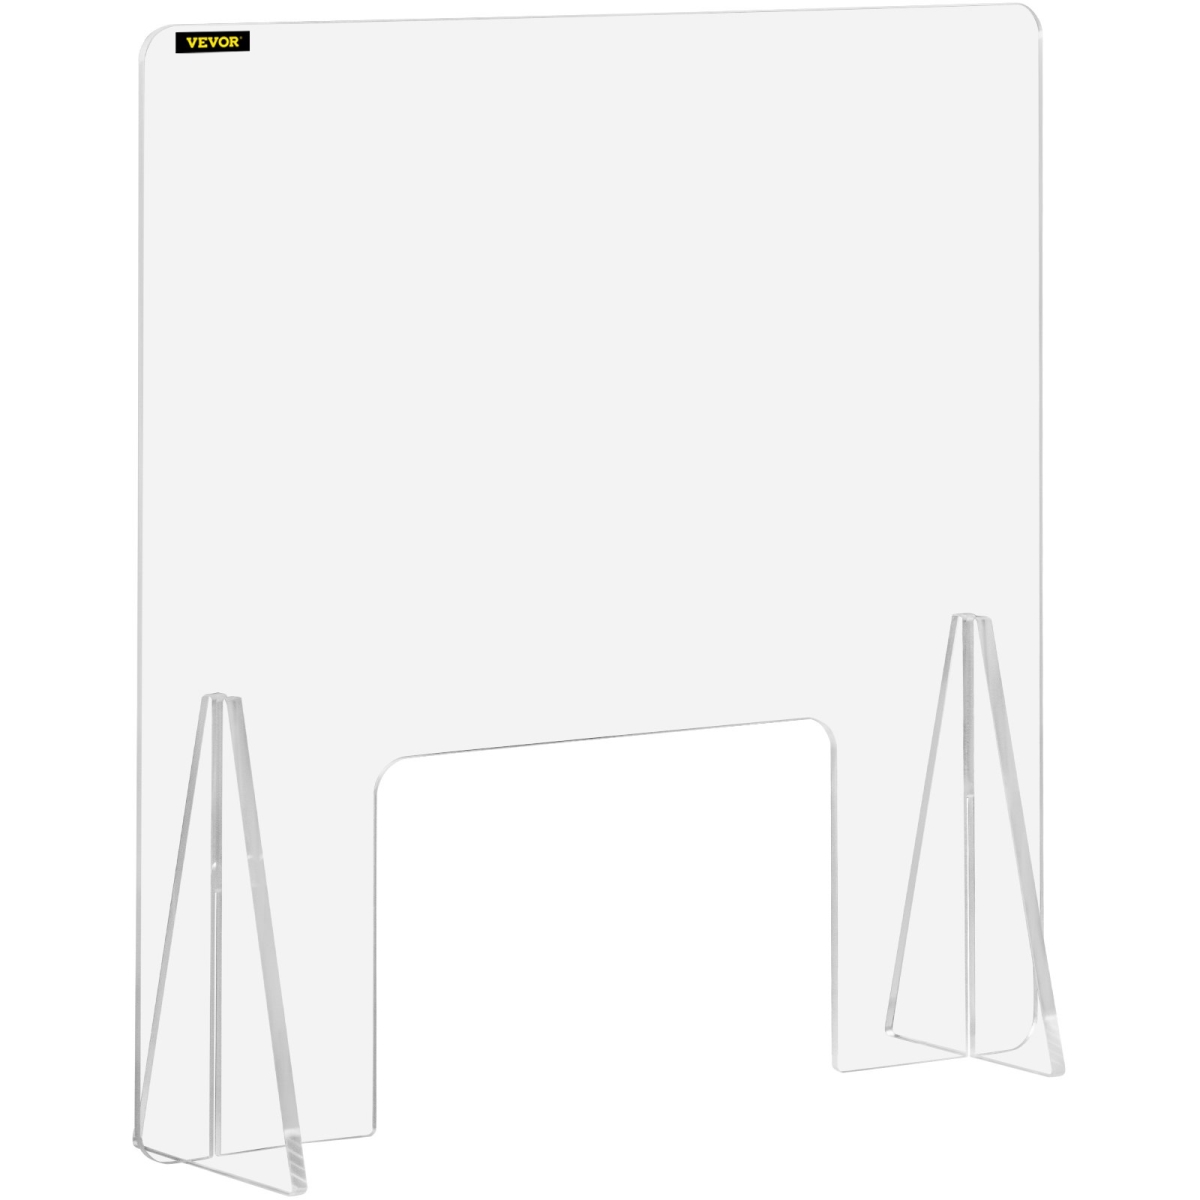 Picture of Vevor ZMDBYKLGB24X24001V0 24 x 24 in. Acrylic Screen for Counter